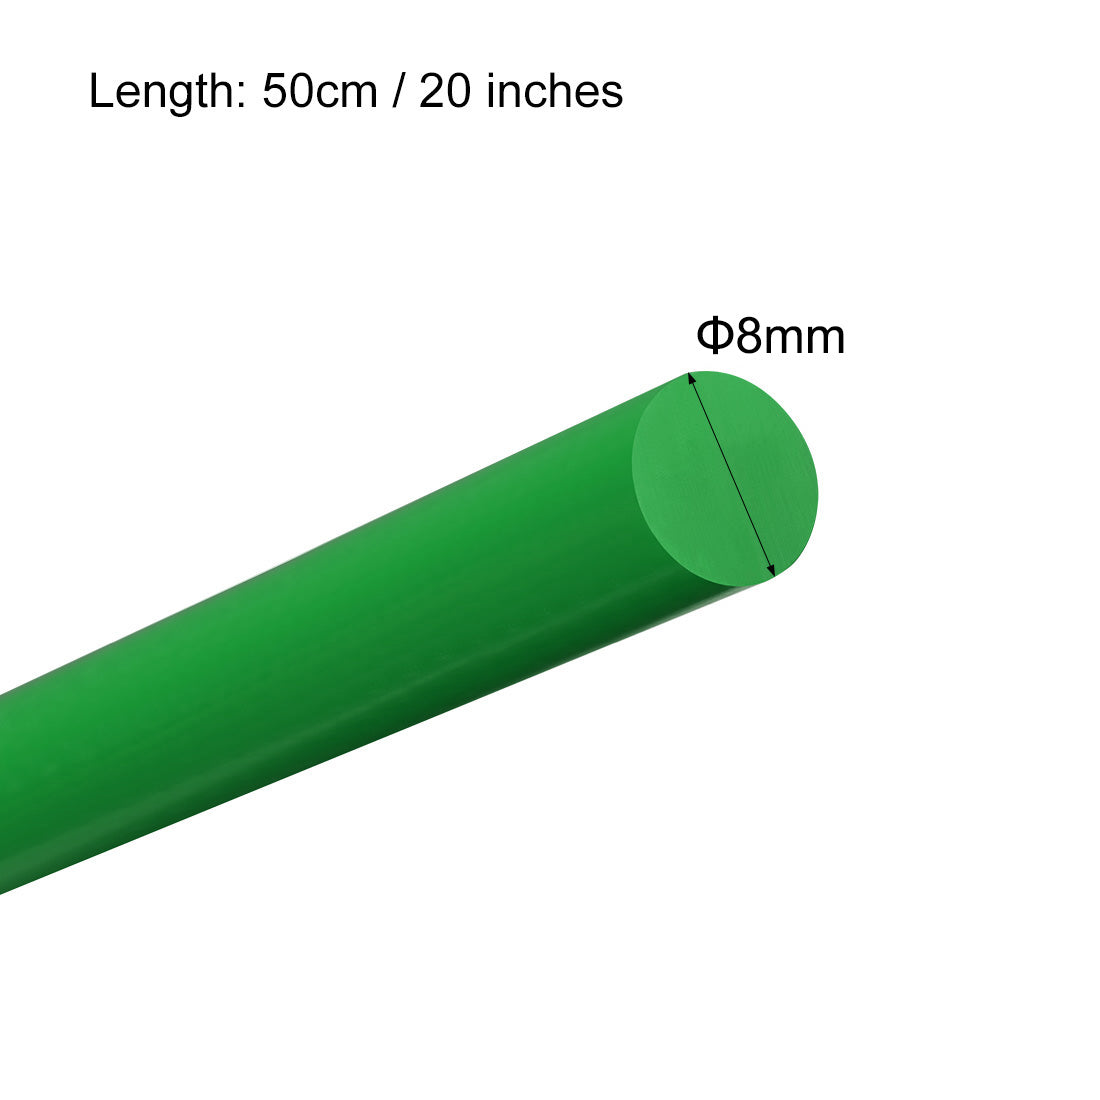 uxcell Uxcell Plastic Round Rod,8mm Dia 50cm Green Engineering Plastic Round Bar 3pcs